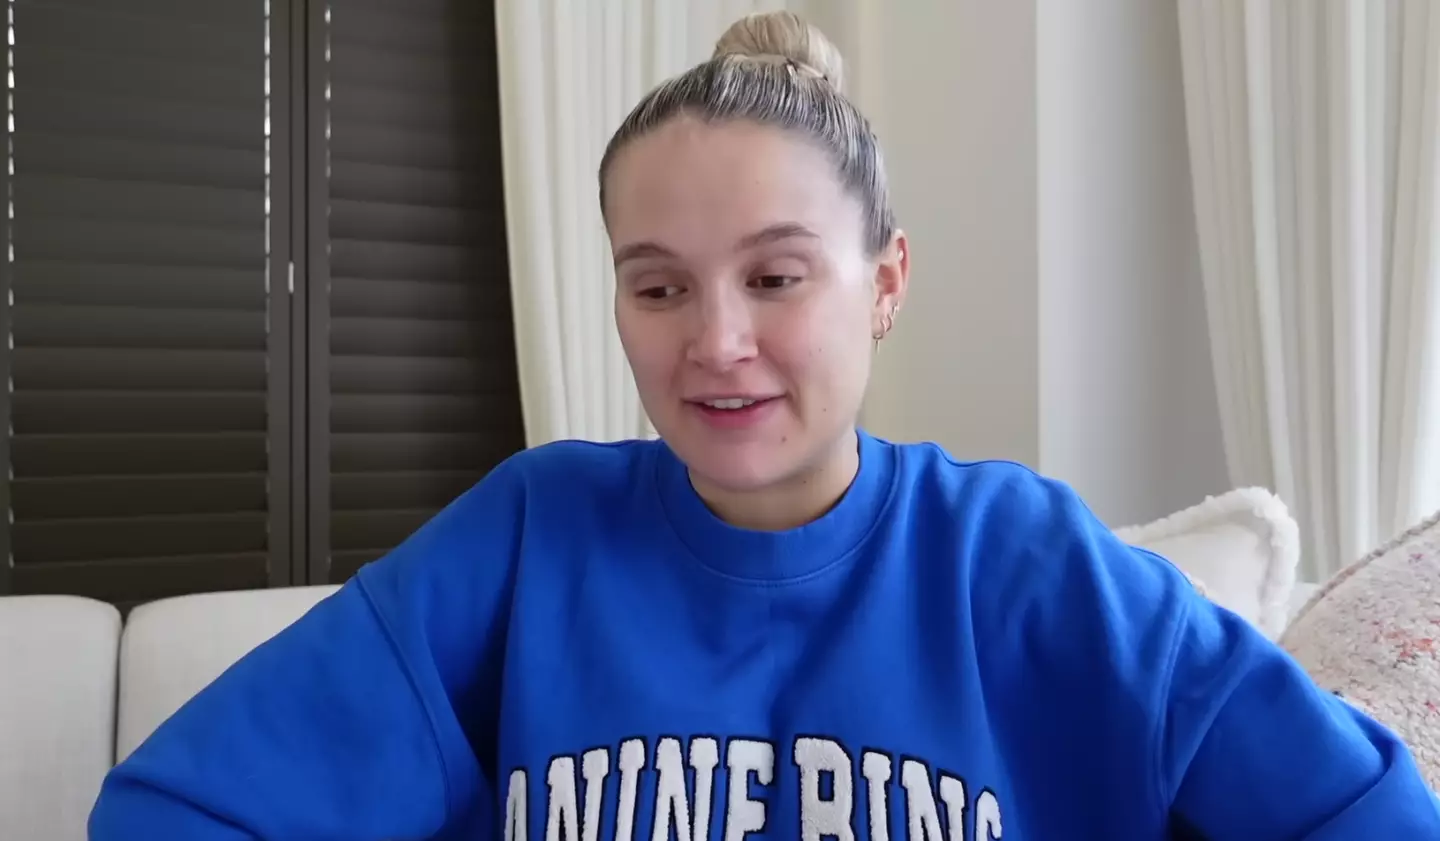 Molly-Mae discussed her pregnancy in a new video.